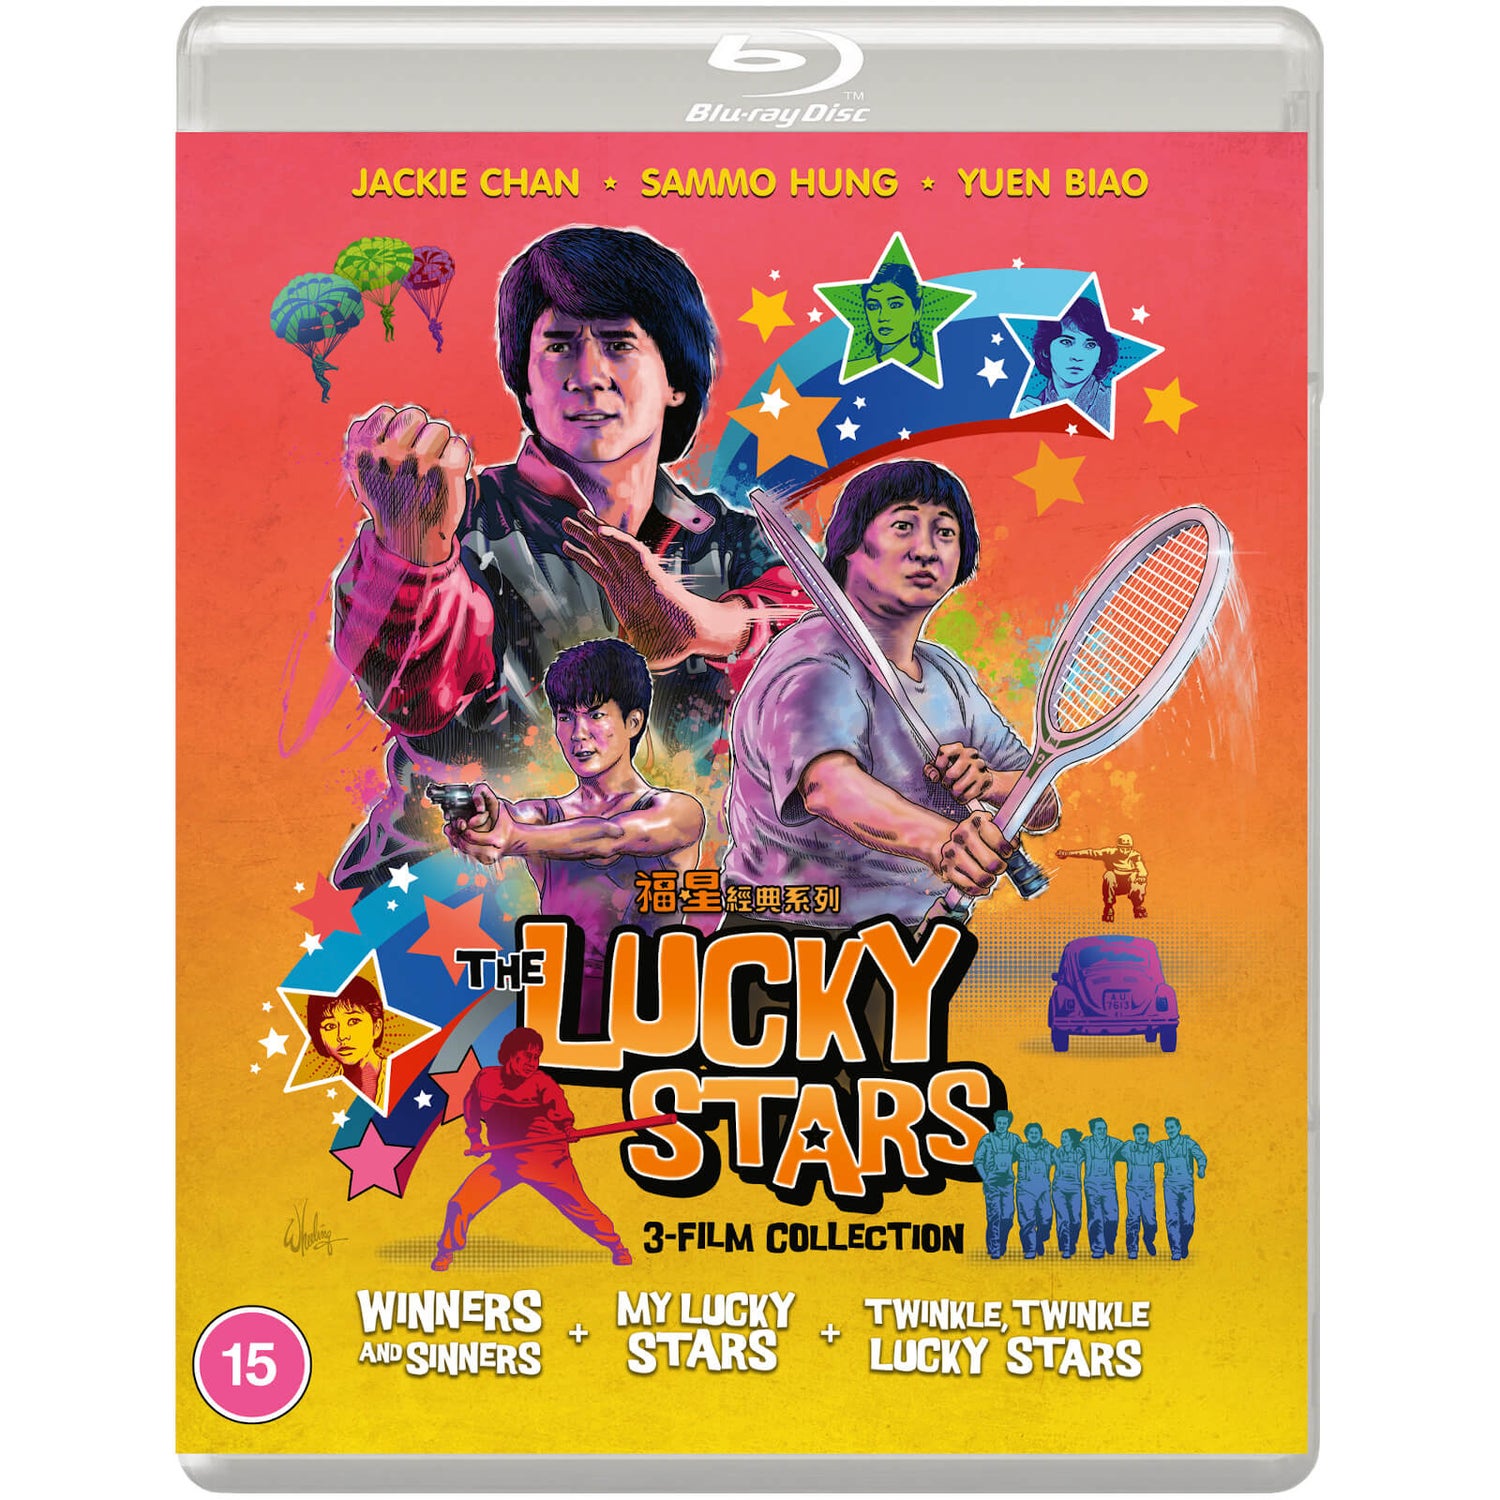 The Lucky Stars 3-Film Collection (Eureka Classics)